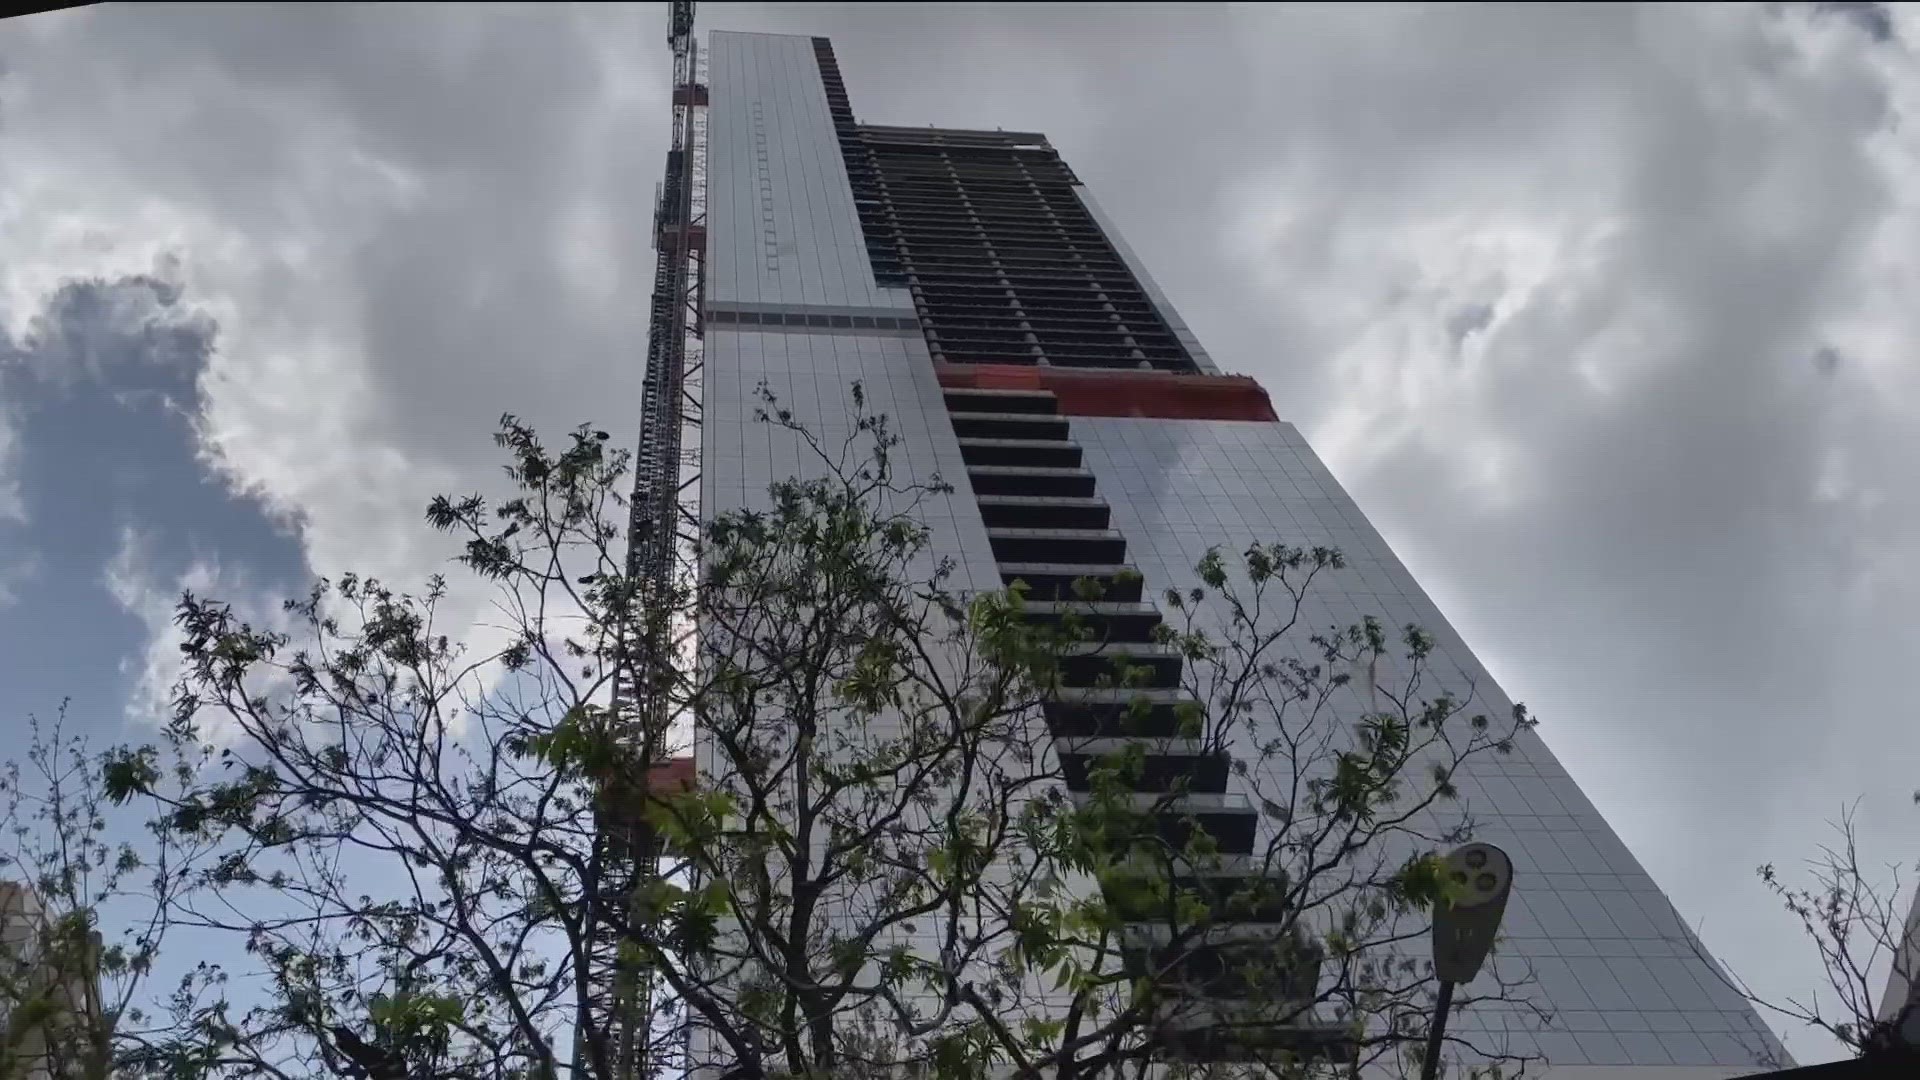 Construction on Austin's tallest building is getting closer to completion. KVUE's Matt Fernandez got a behind-the-scenes look at the progress on the mixed-use tower.